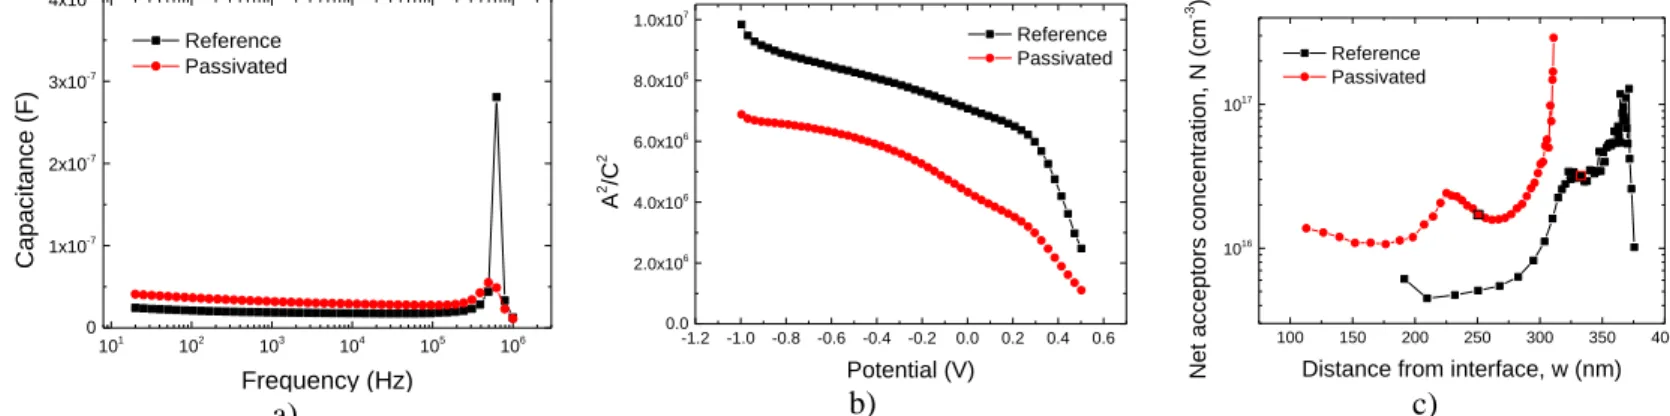 Figure 2.5 - Measurements of reference and passivated cell: a) C-f curve; b) Mott-Schottky curve and c)  N-w curve 